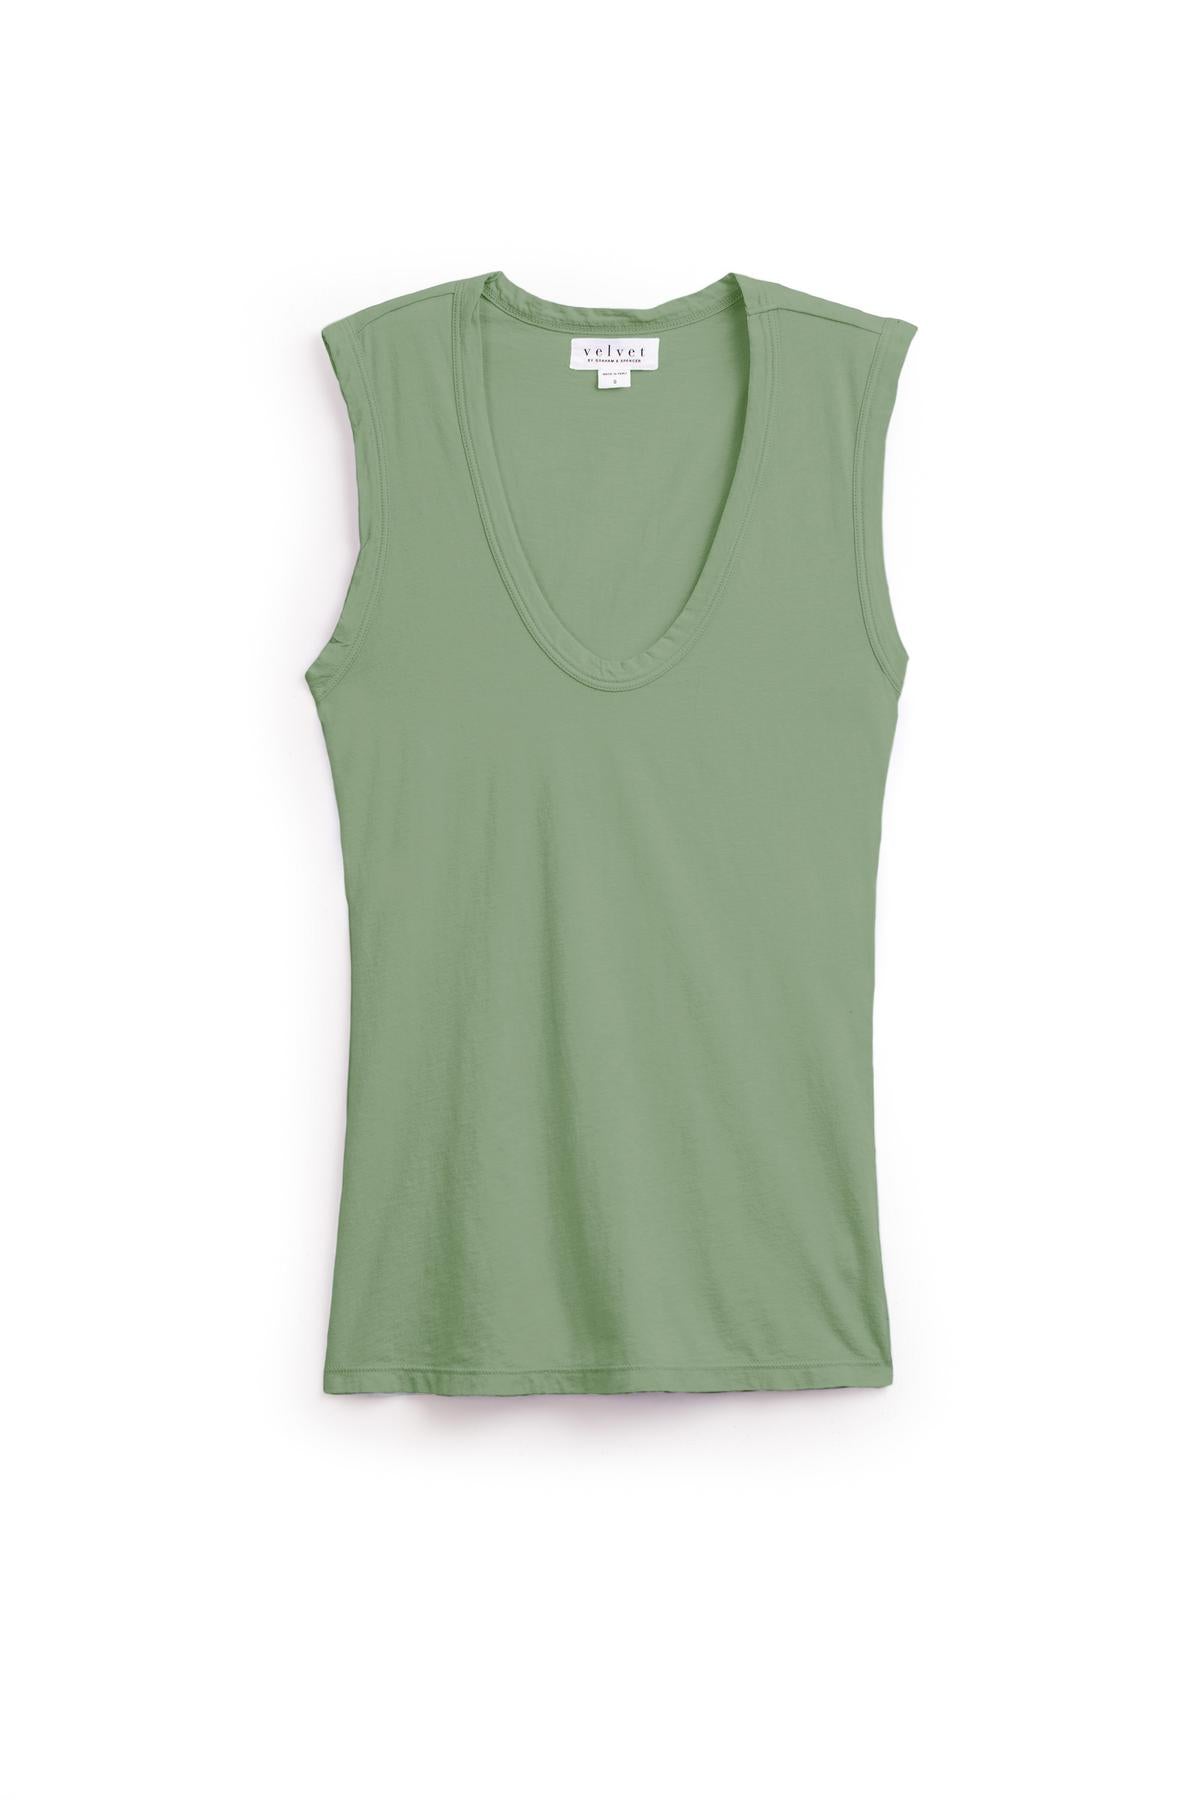 A sleeveless, sage green Velvet by Graham & Spencer ESTINA TANK TOP with a deep low-scoop-neck, crafted from soft gauzy whisper fabric, displayed against a white background.-36131064185025